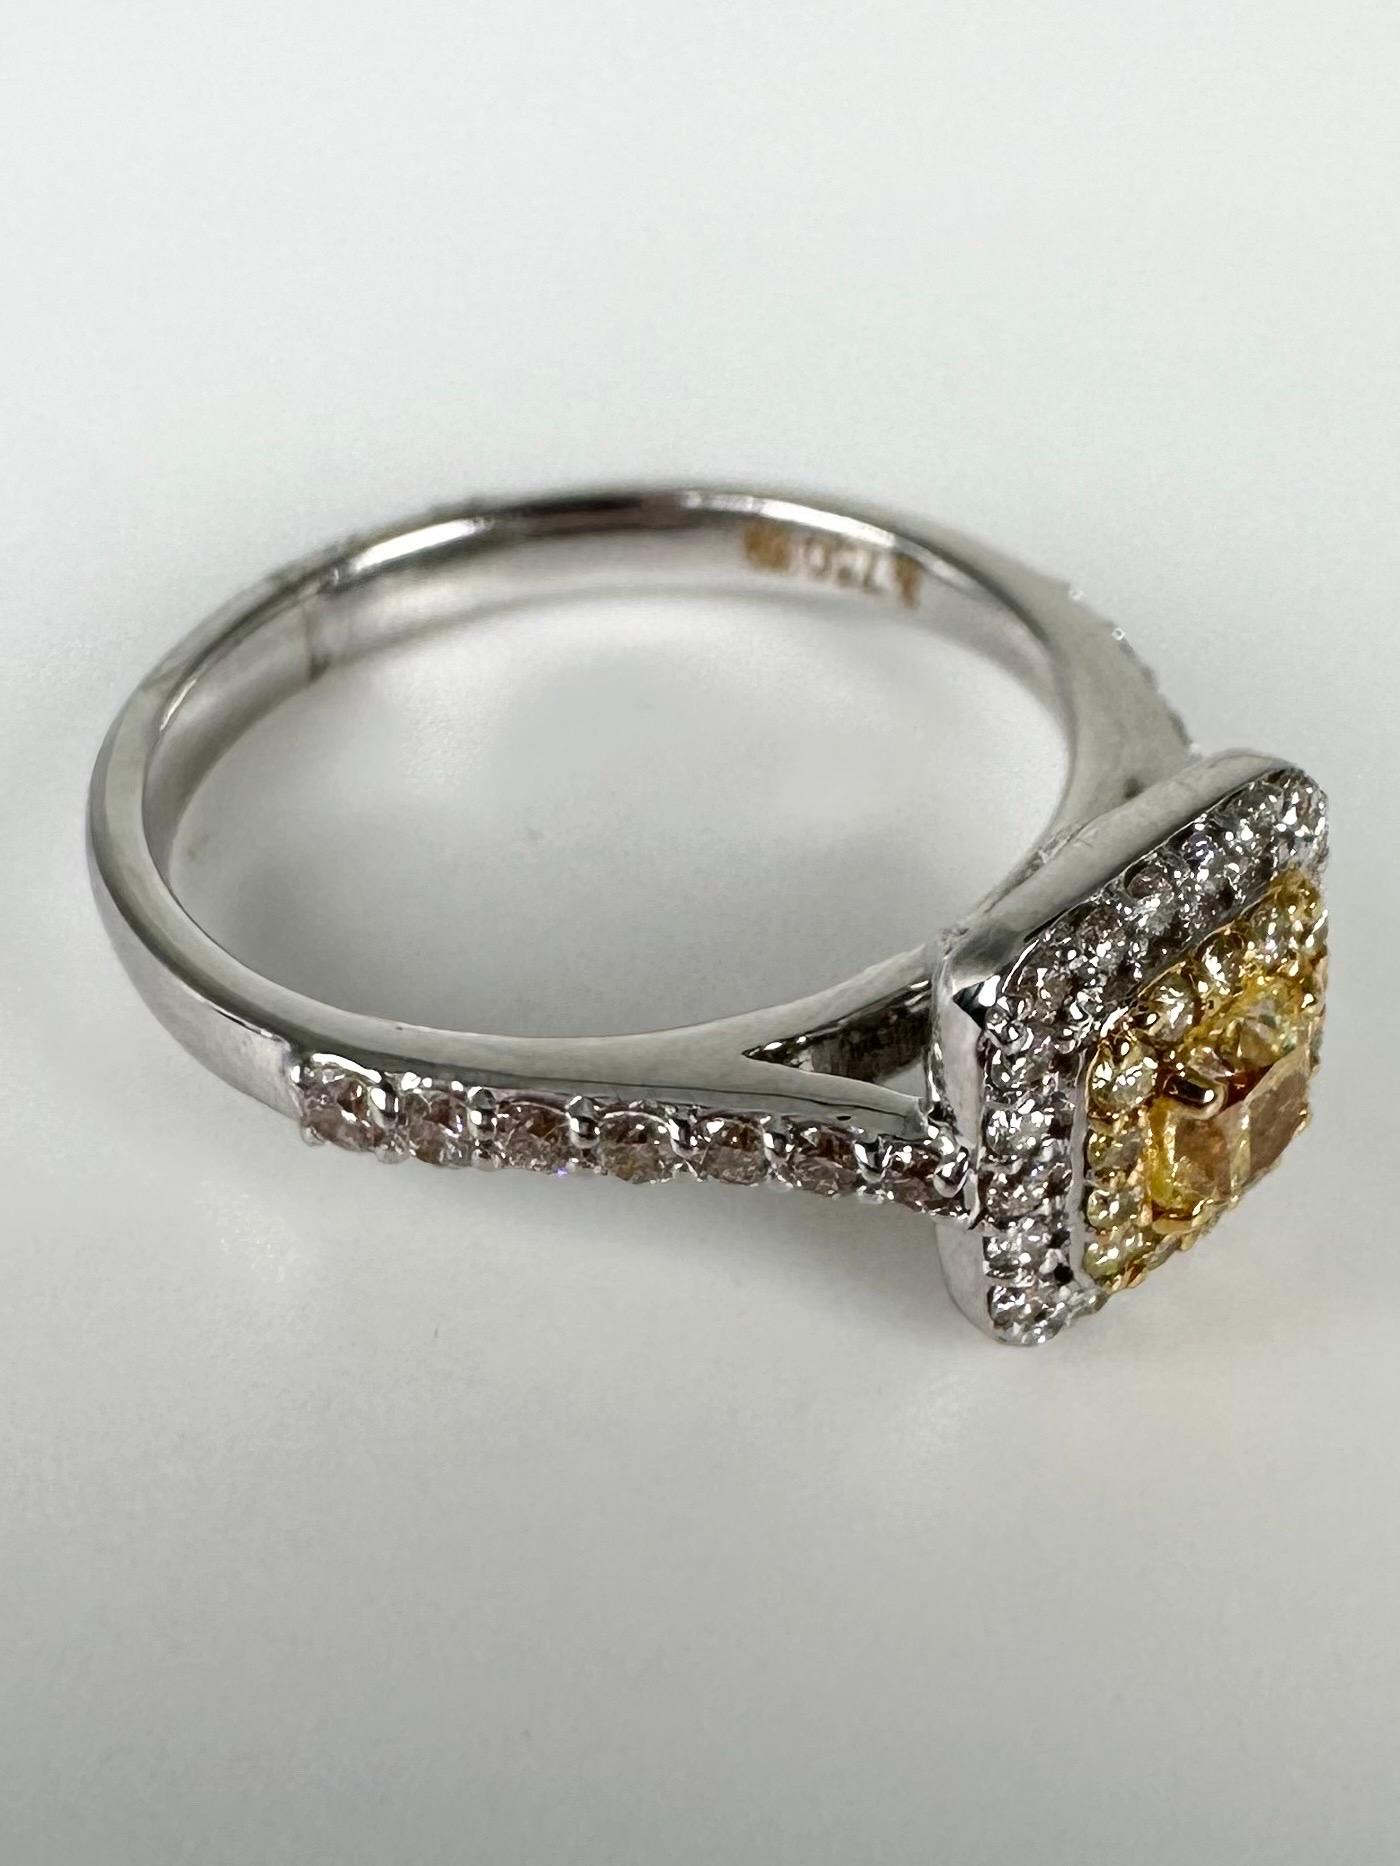 Fancy yellow diamond ring 18KT diamond ring engagement diamond ring In New Condition For Sale In Jupiter, FL